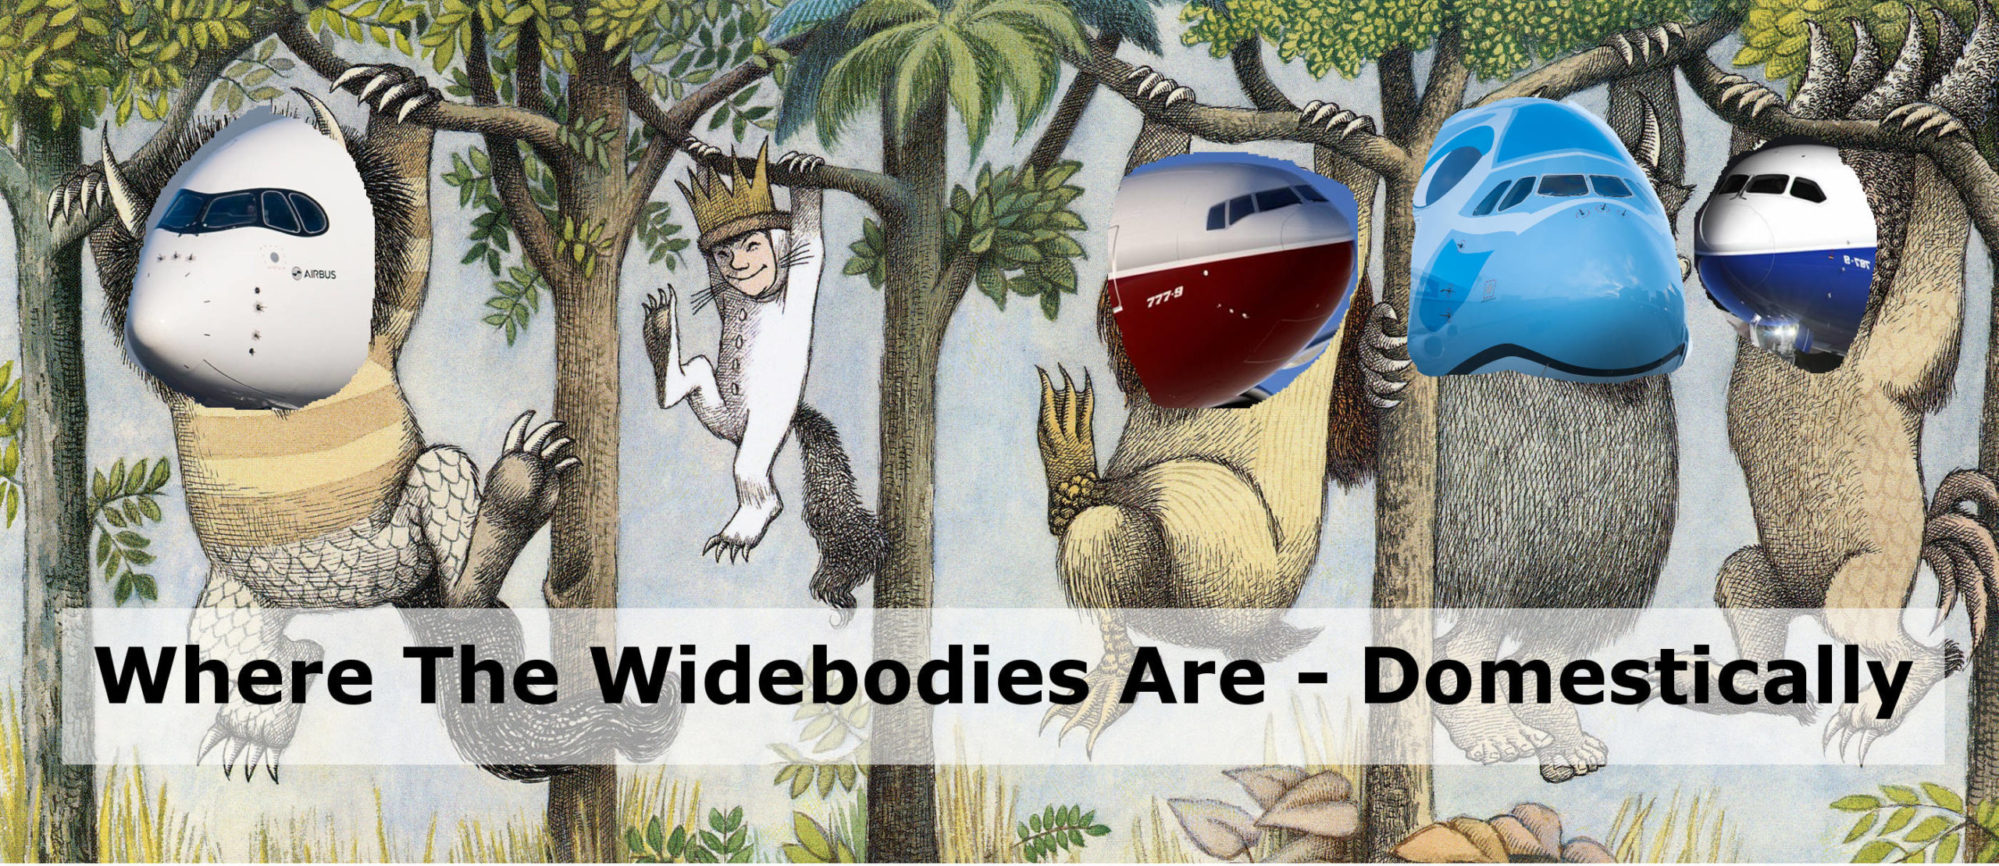 Where the widebodies are - domestically